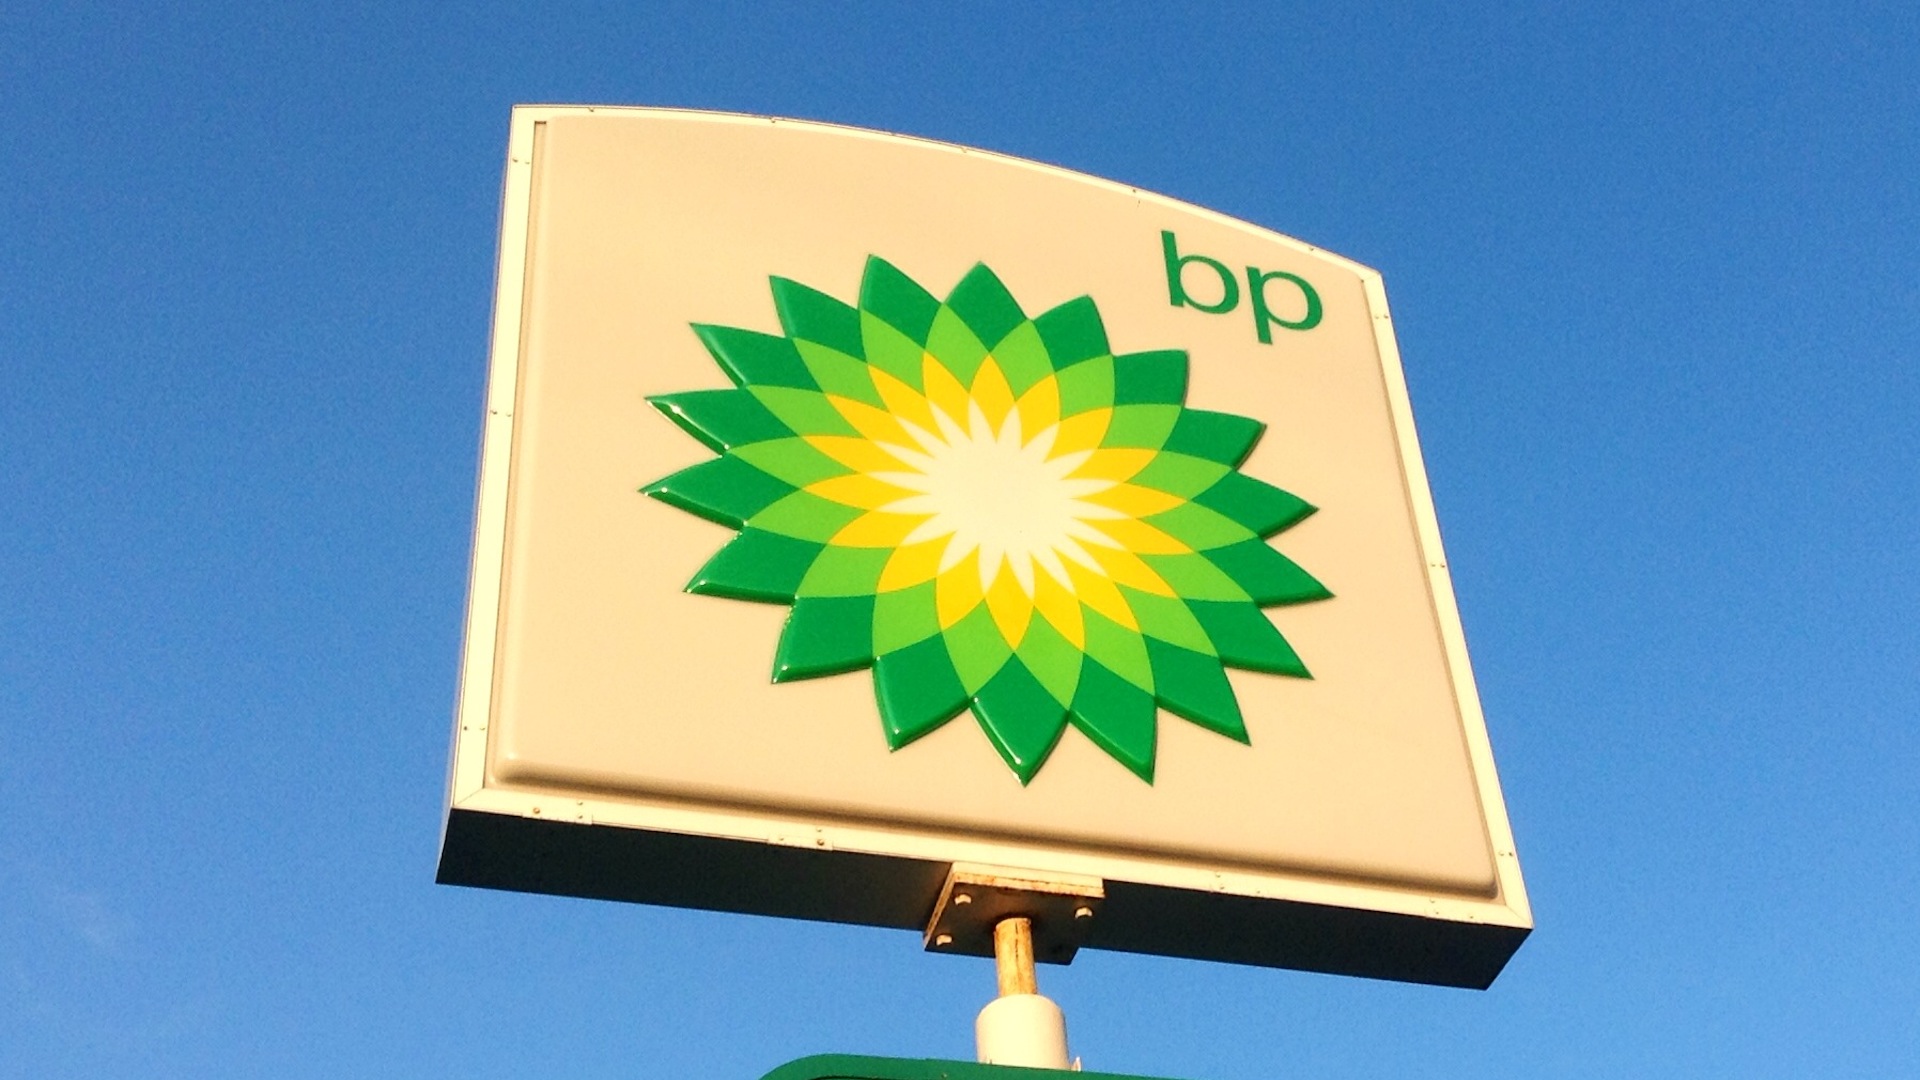 A BP sign with it's yellow and green spiky circles fills the screen against a clear blue skyfills